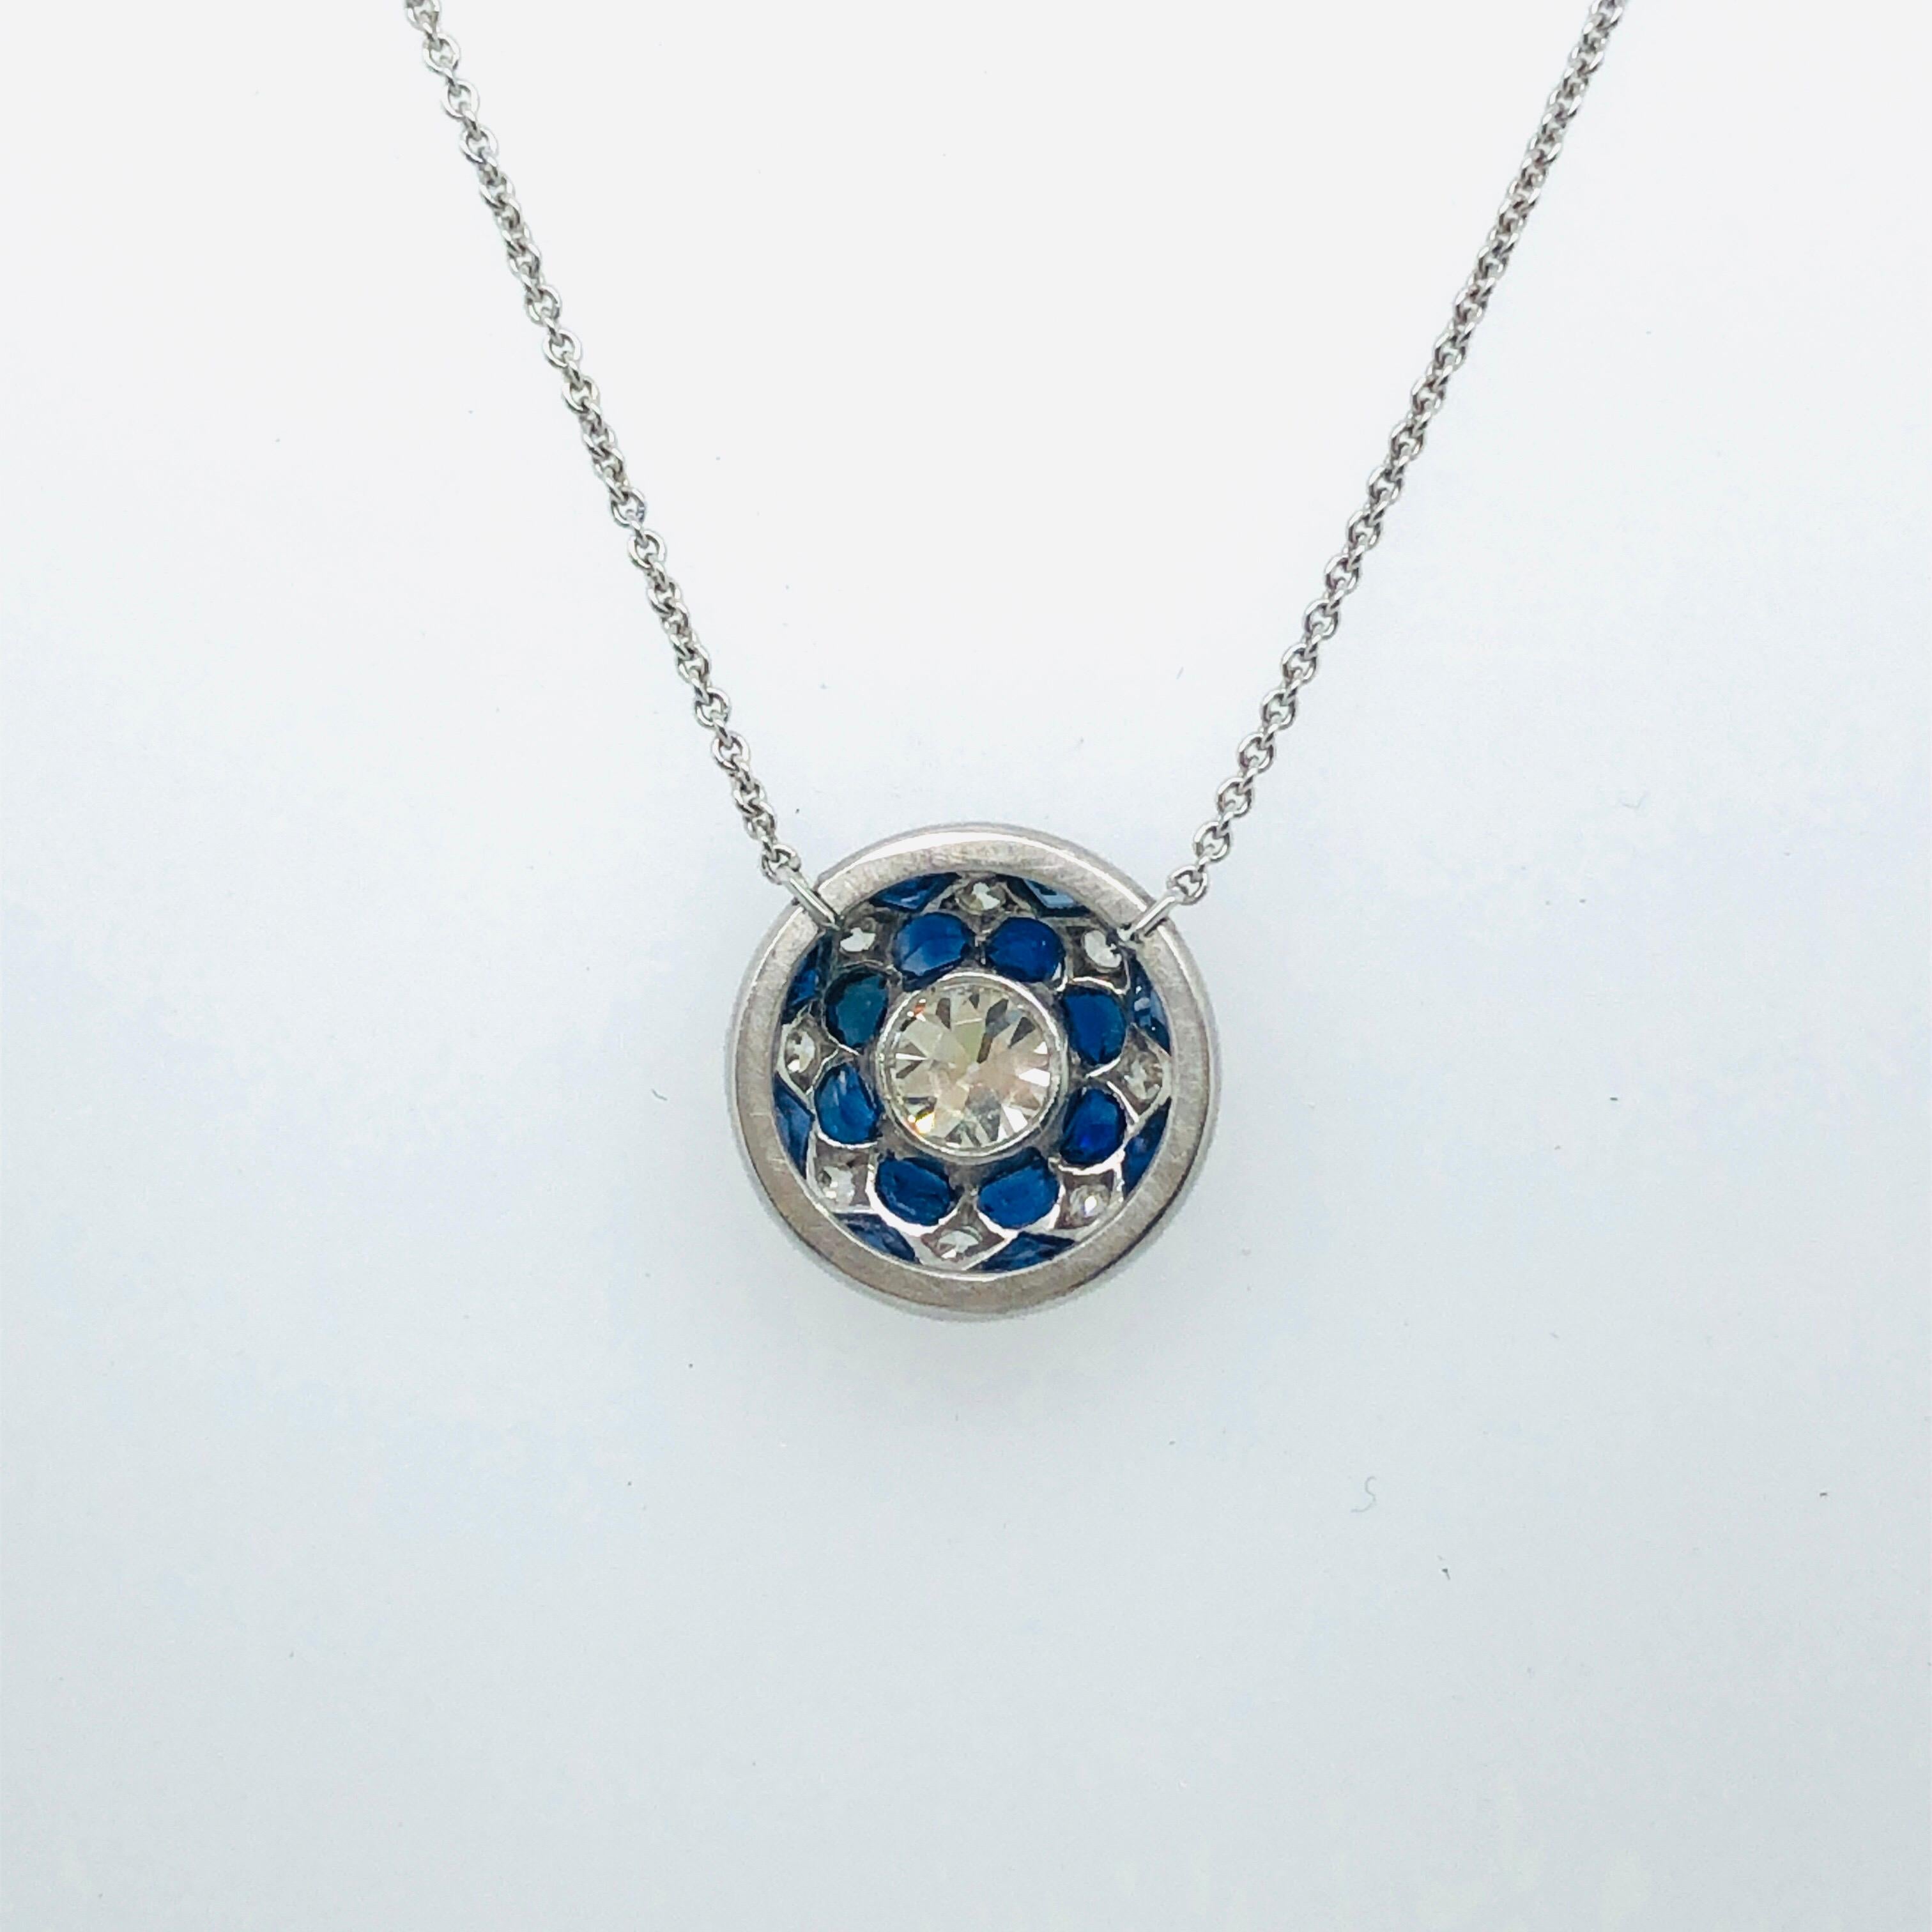 Adorable 18 karat white gold platinum old-cut diamonds and sapphires pendant necklace. 
The necklace is centered by an antique round platinum element set with an old round cut diamond of circa 0.4 carats ( M / vvs ) surrounded by small blue